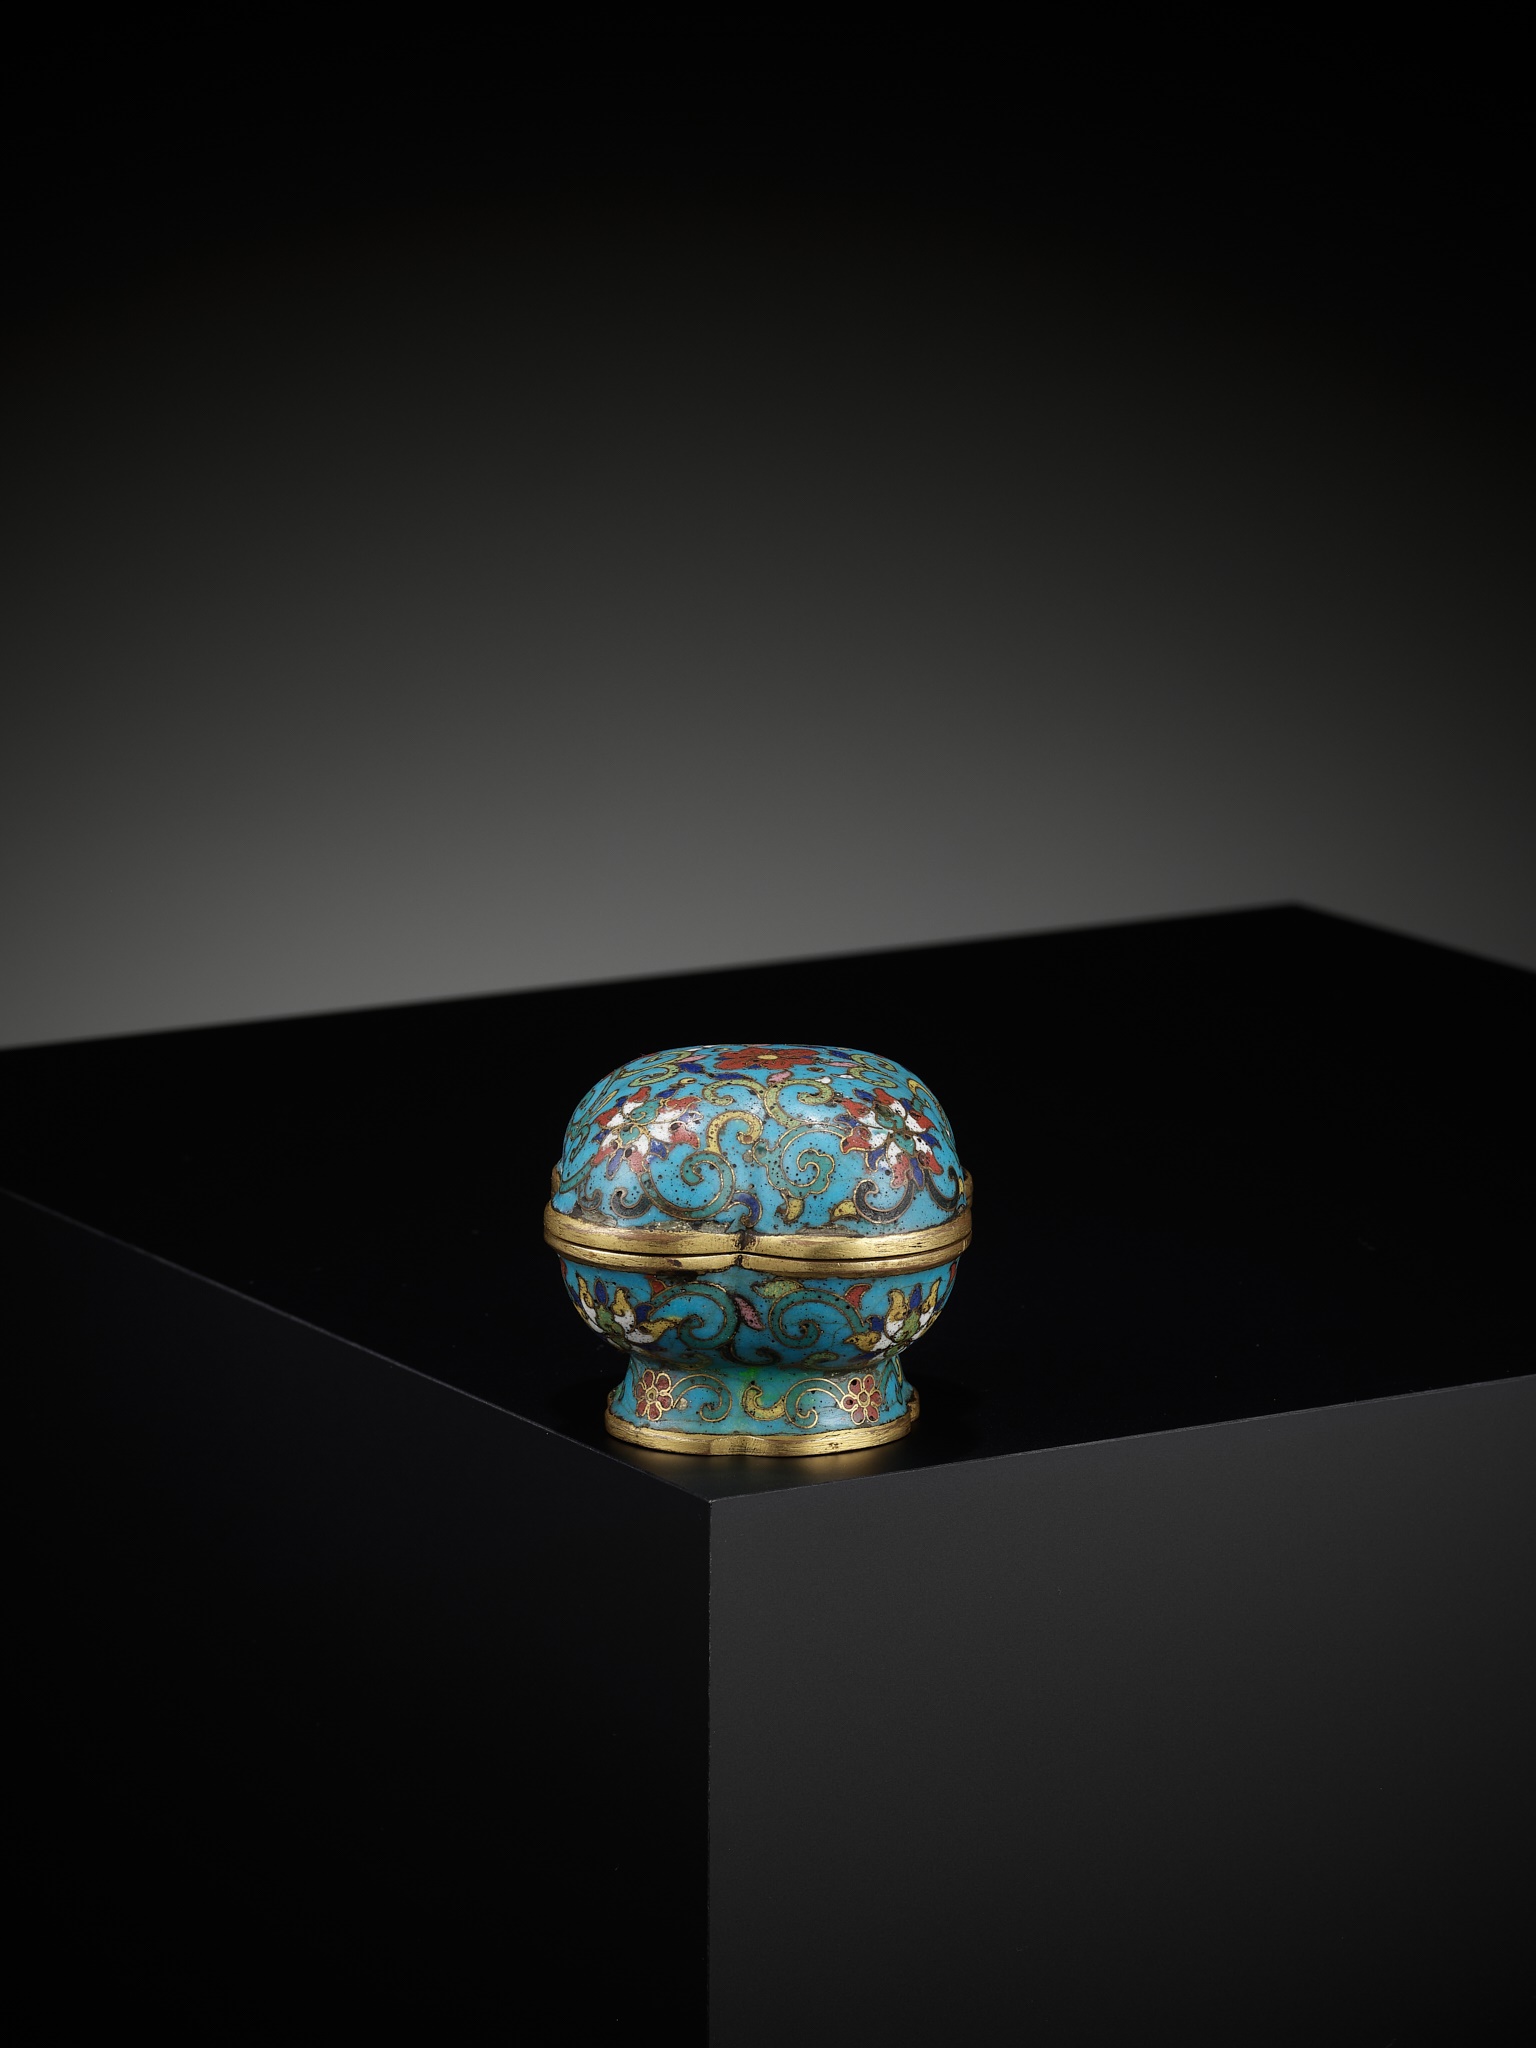 AN EXTREMELY RARE CLOISONNE ENAMEL QUADRILOBED BOX AND COVER, QIANLONG MARK AND OF THE PERIOD - Image 12 of 21